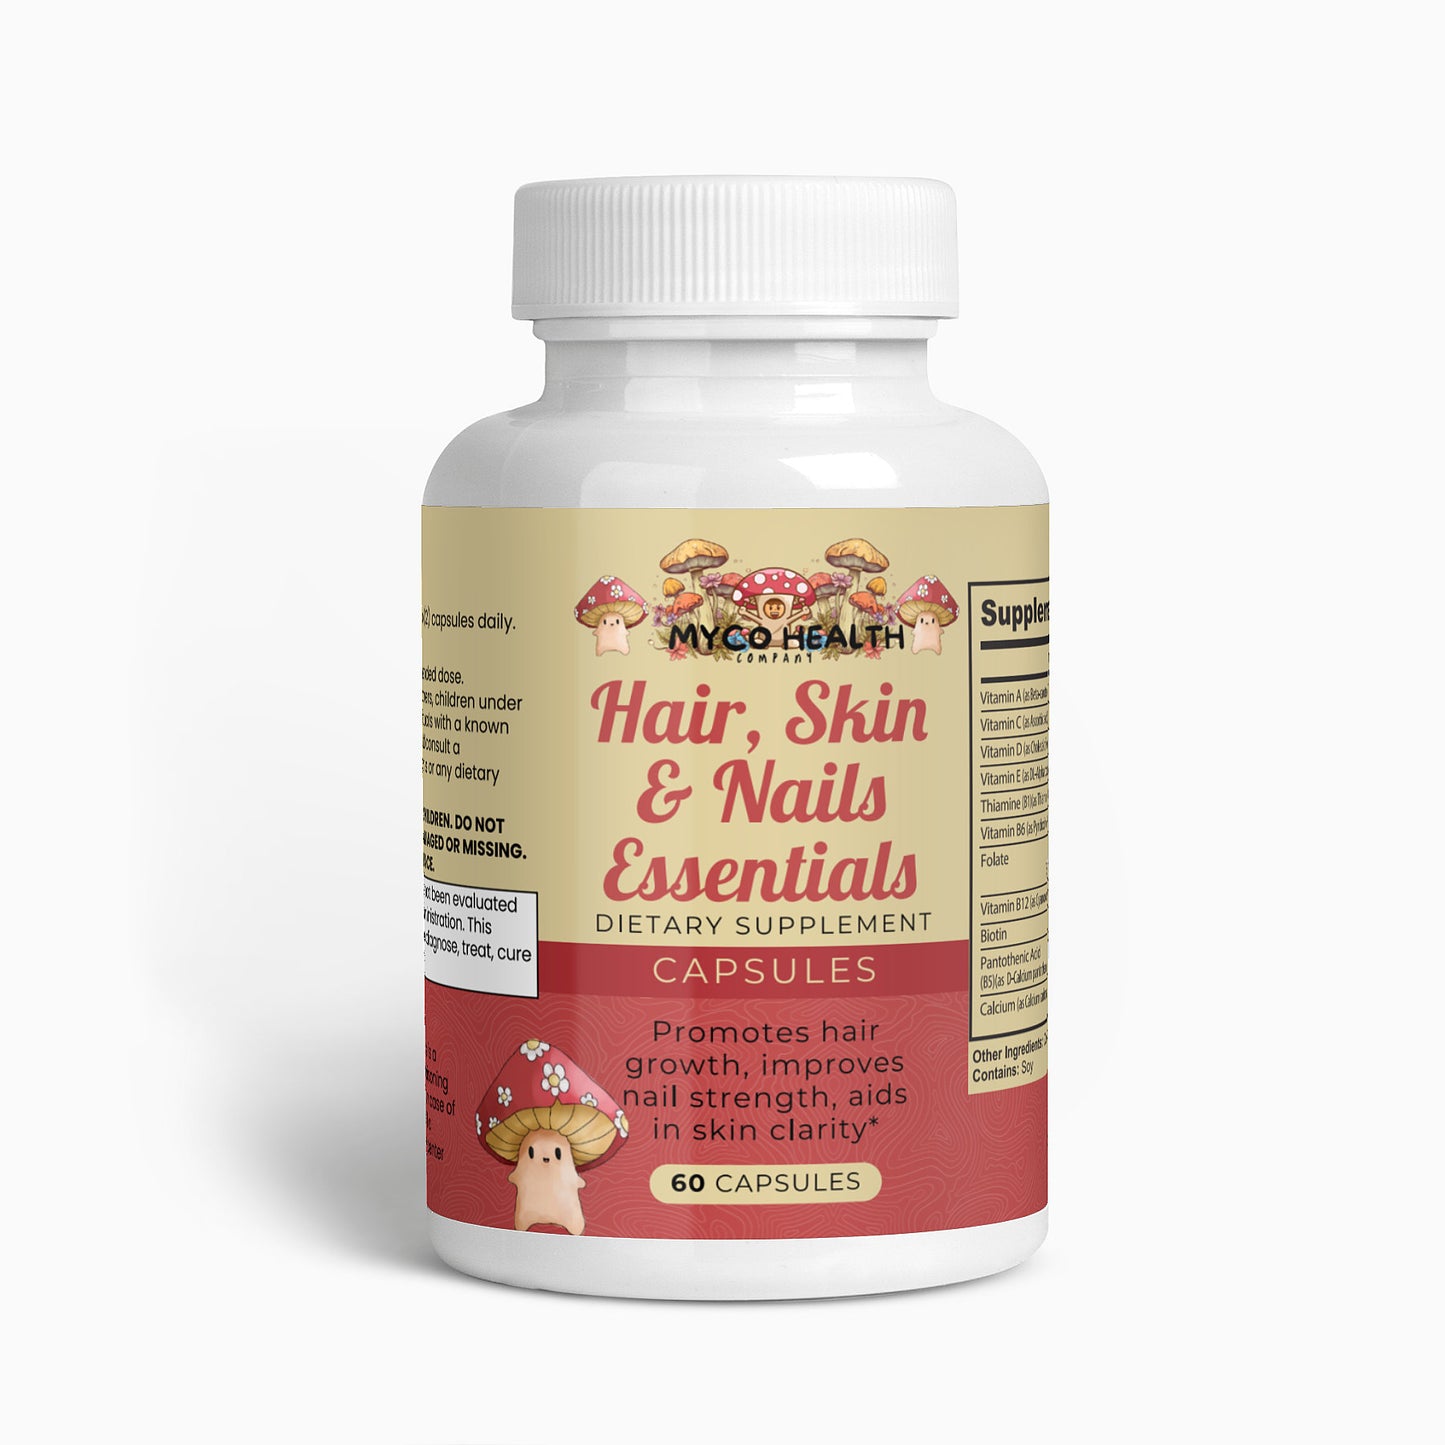 Hair, Skin and Nails Essentials: Natural Glow Supplement